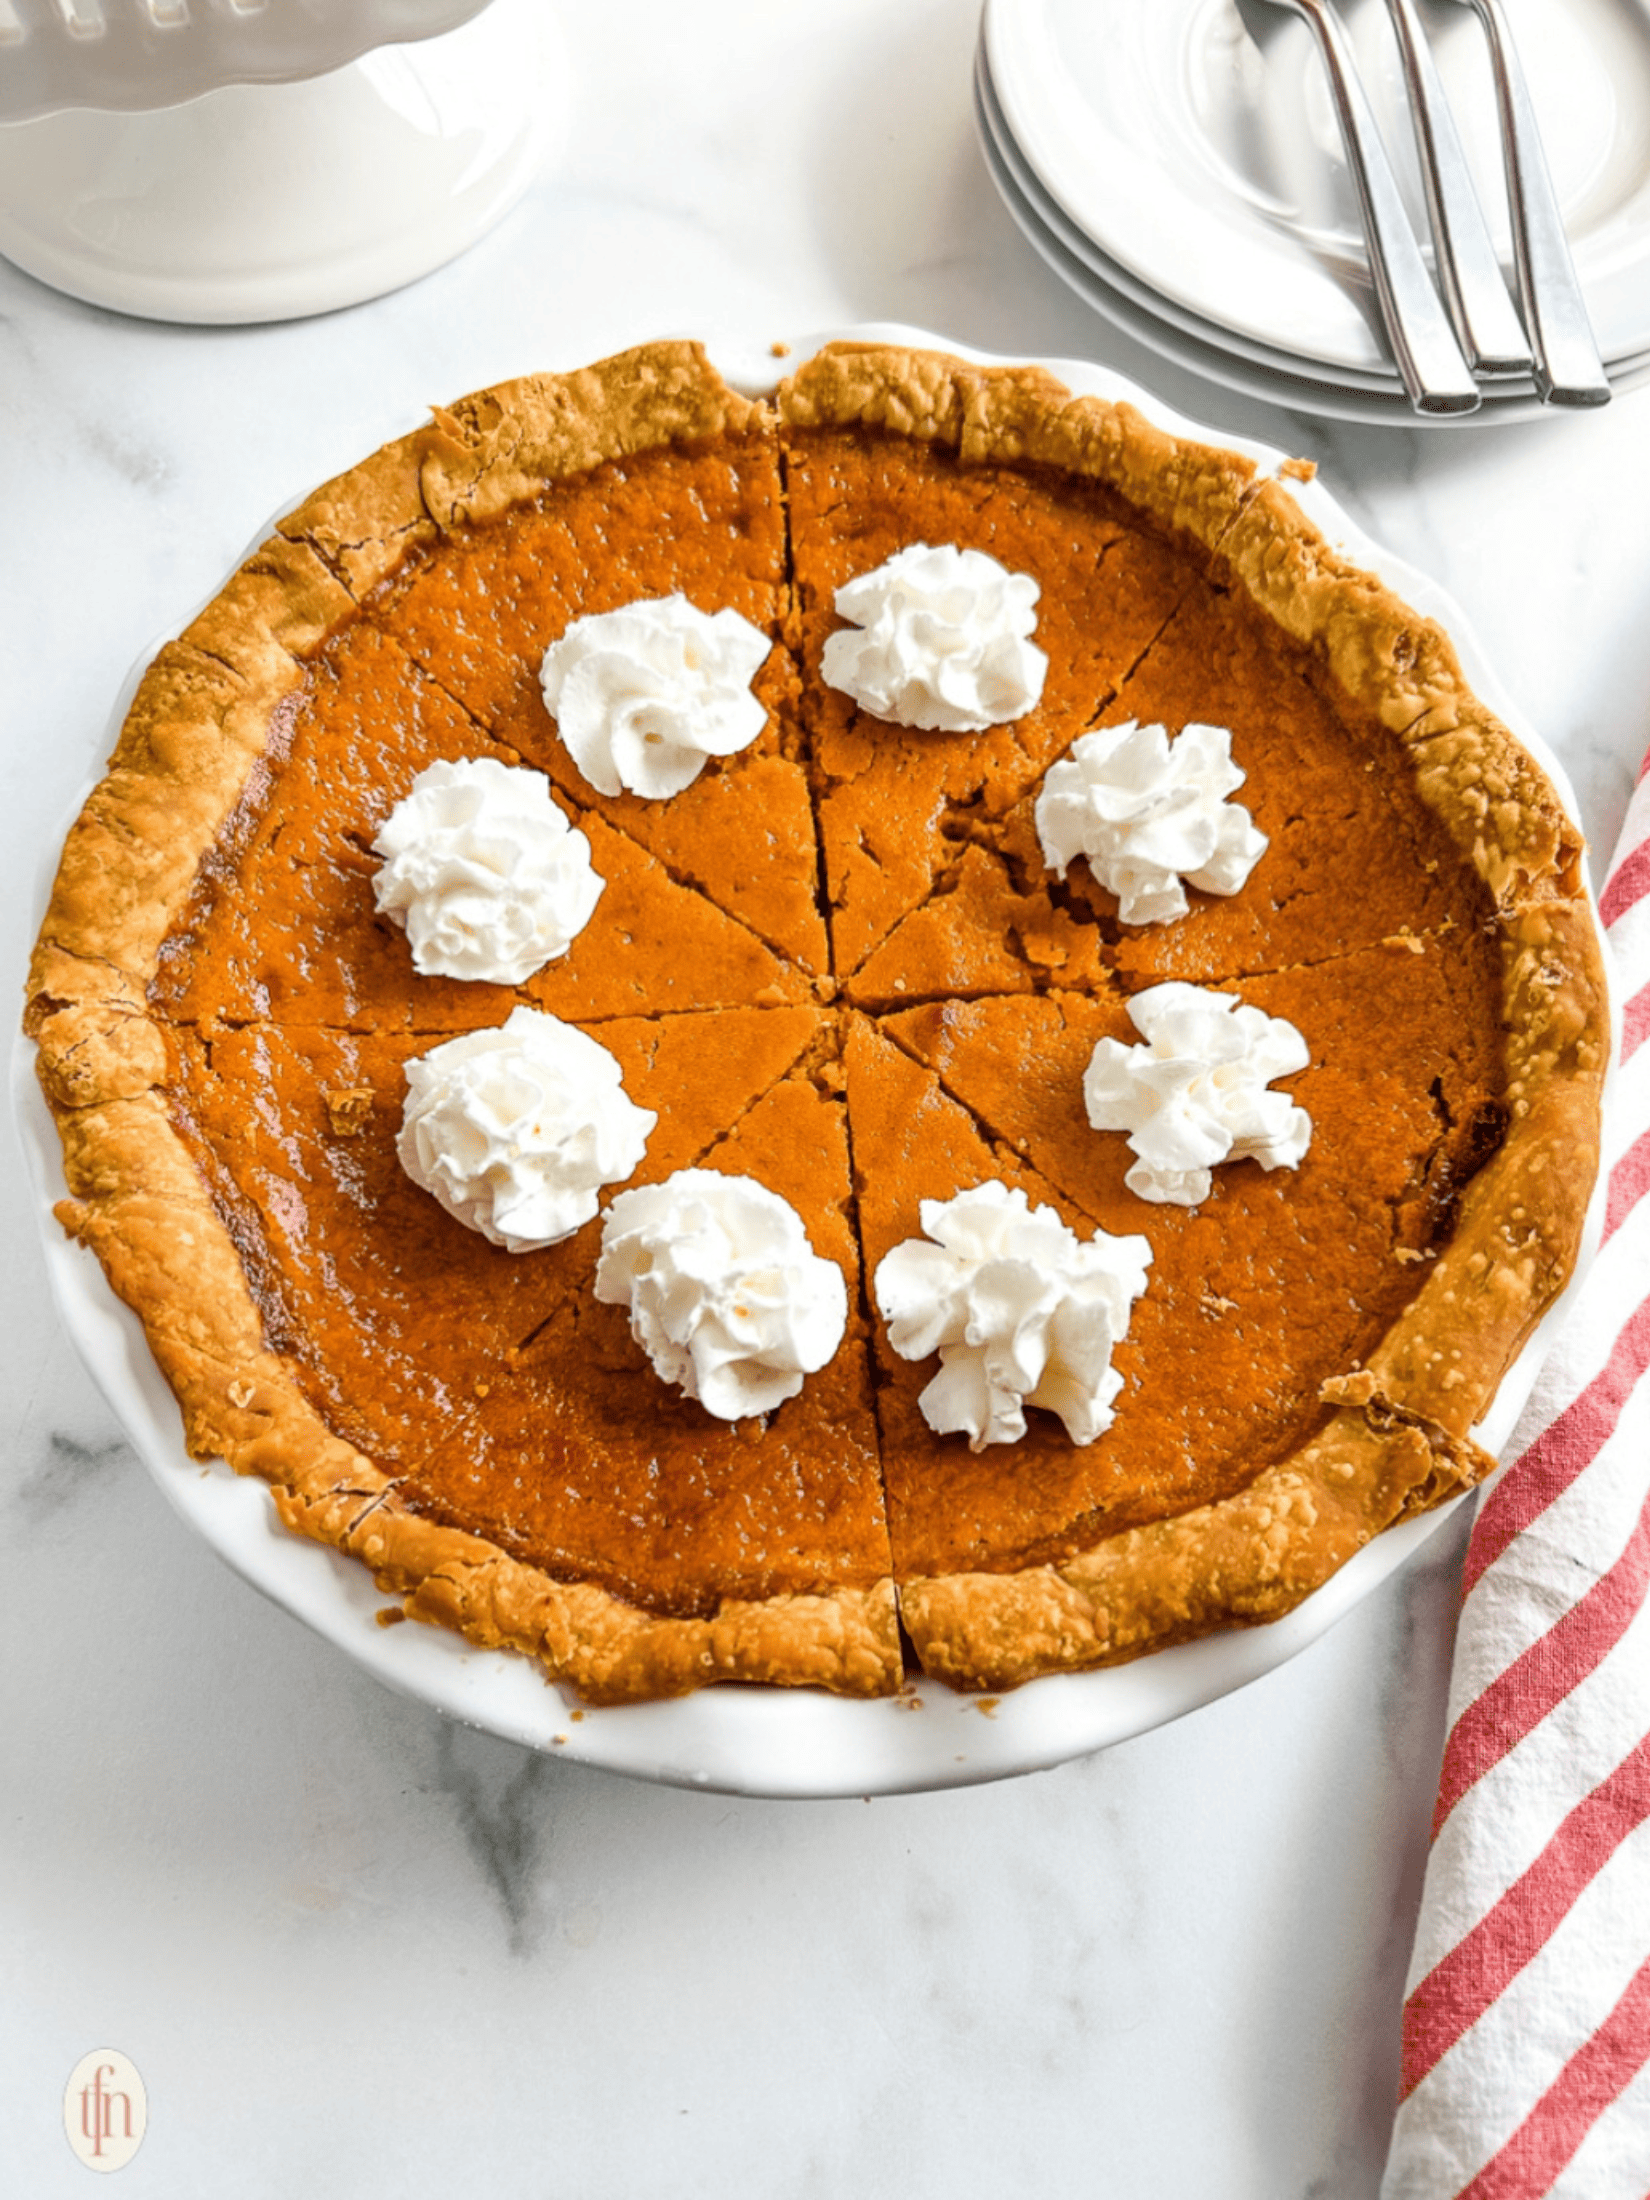 a delicious homemade carrot pie, with a golden crust and a generous layer of creamy carrot filling.